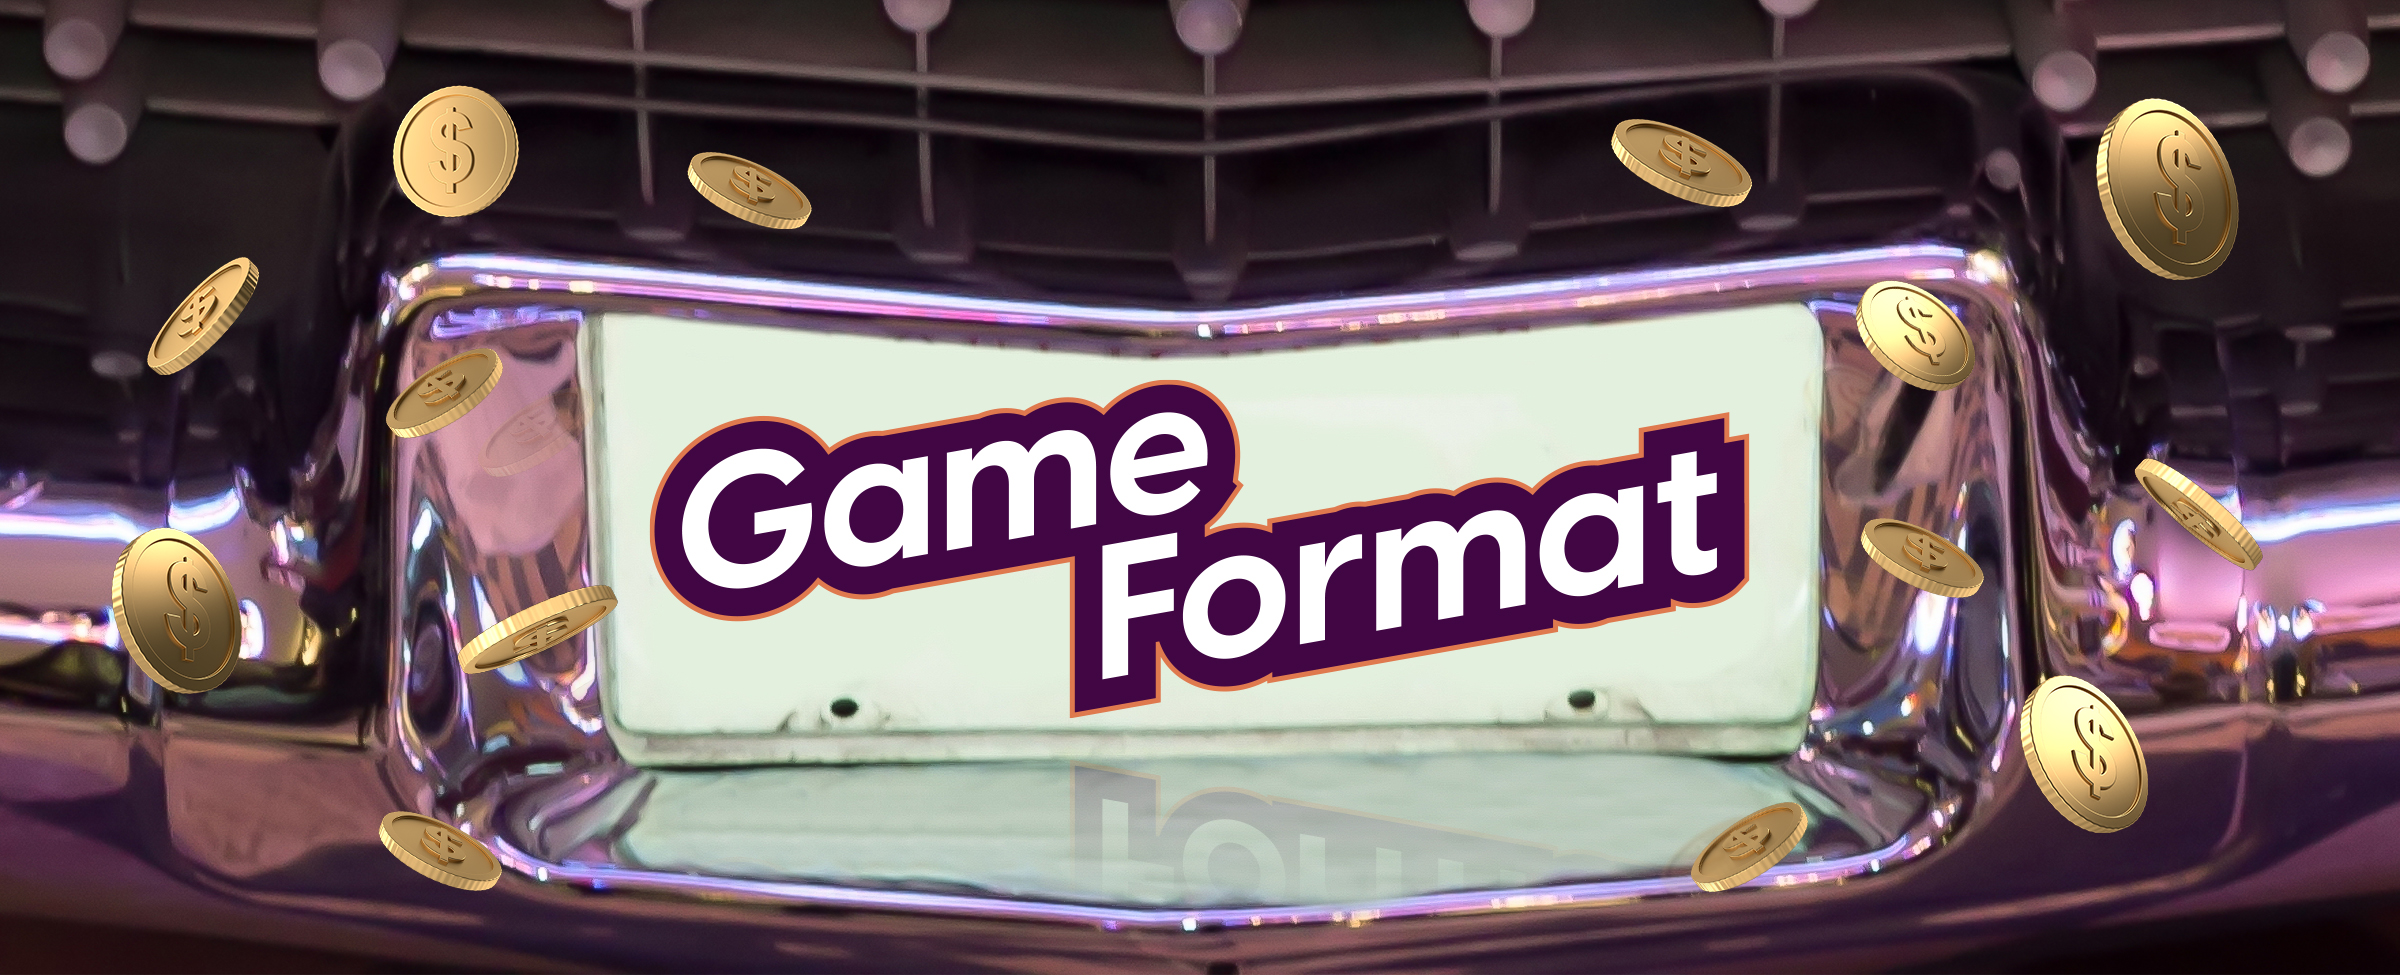 An up-close picture of an all-chrome front grill of a classic American car, focused on the license plate. On the plate are the words “game format” in white and purple, surrounded by falling 3D-animated gold coins.